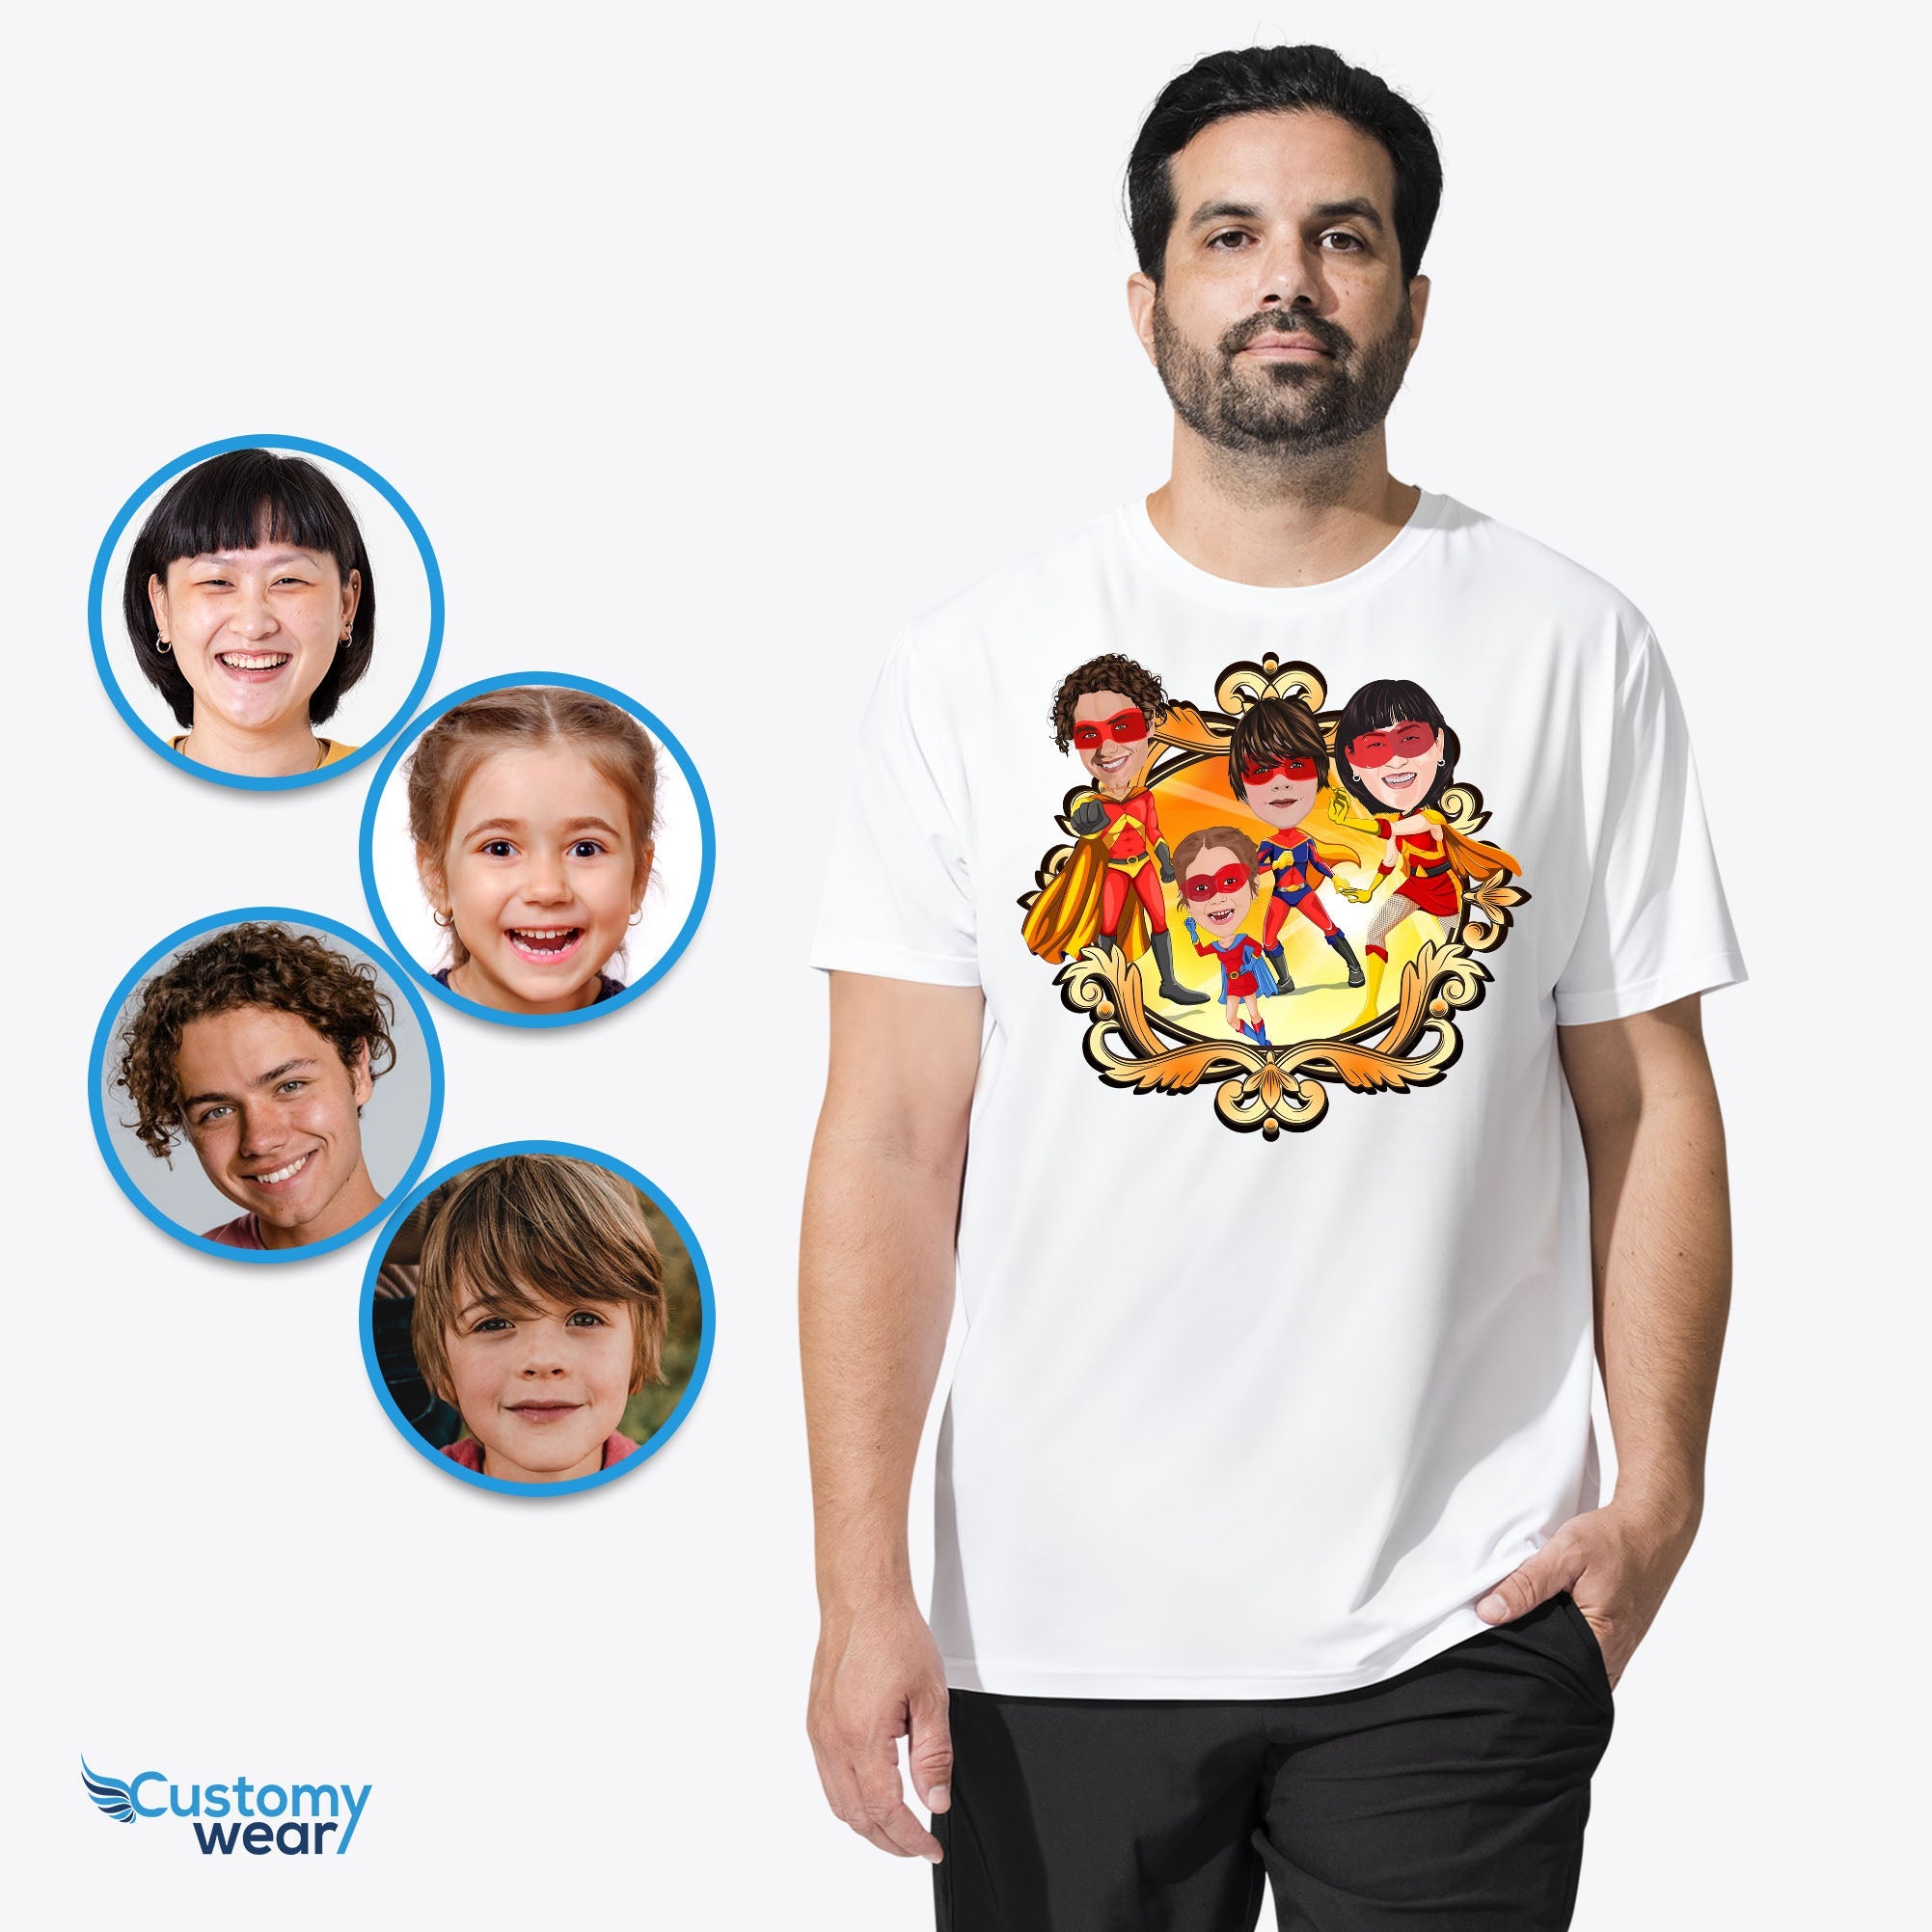 Interactive slider, super-heroes customised t-shirts.